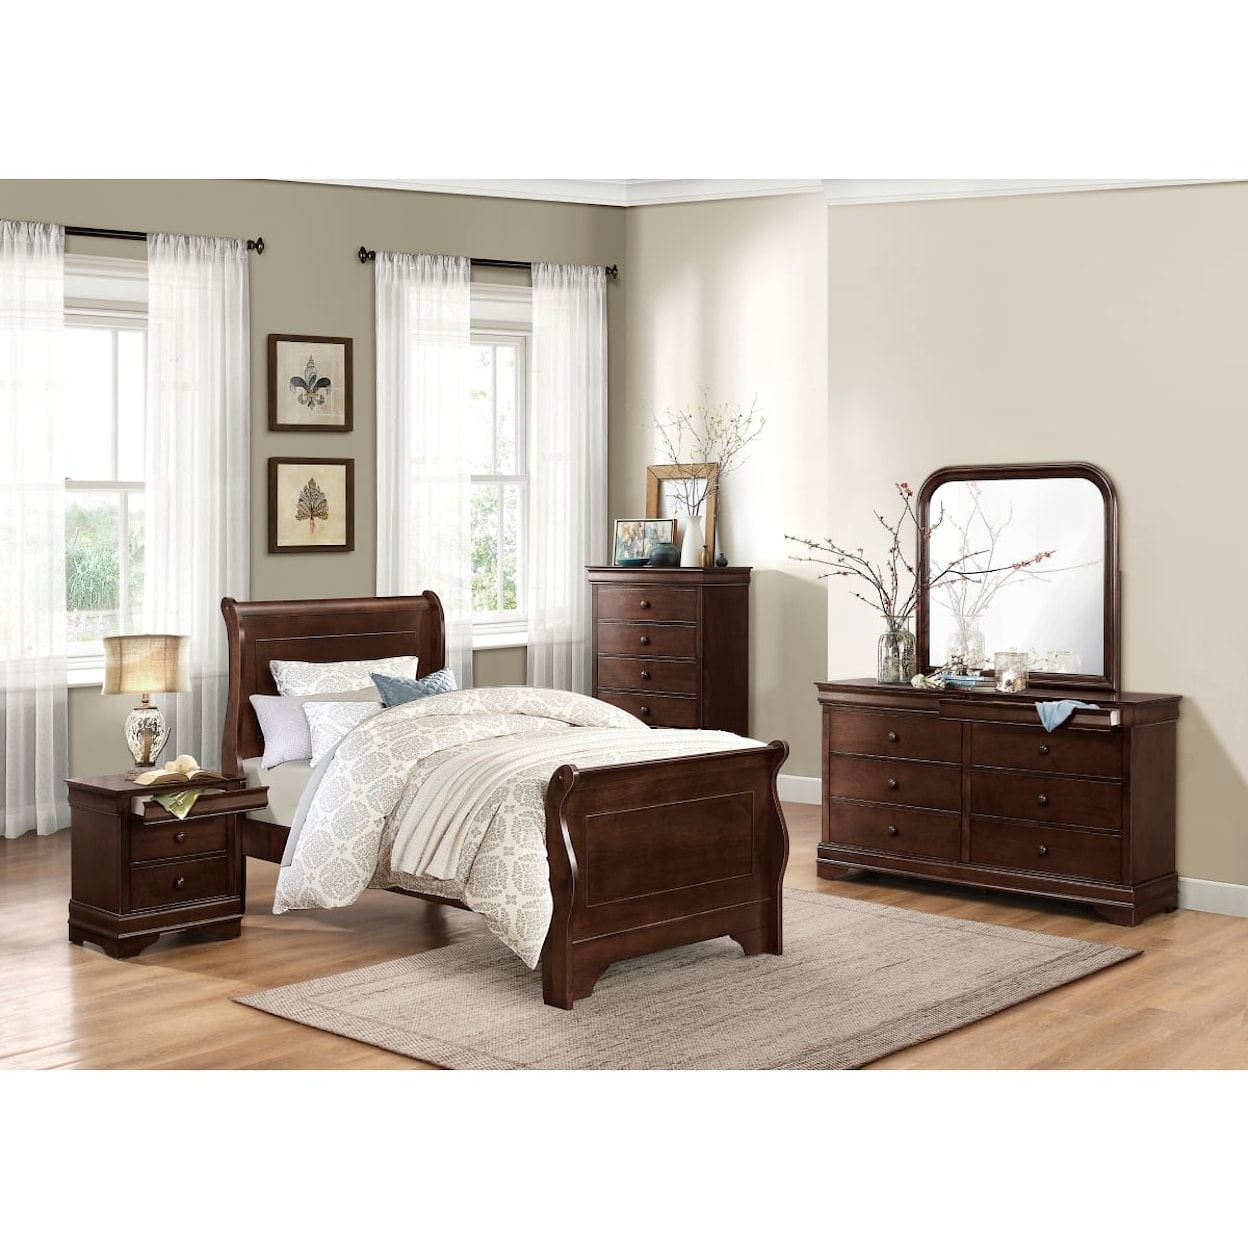 Homelegance Furniture Abbeville Twin Bed